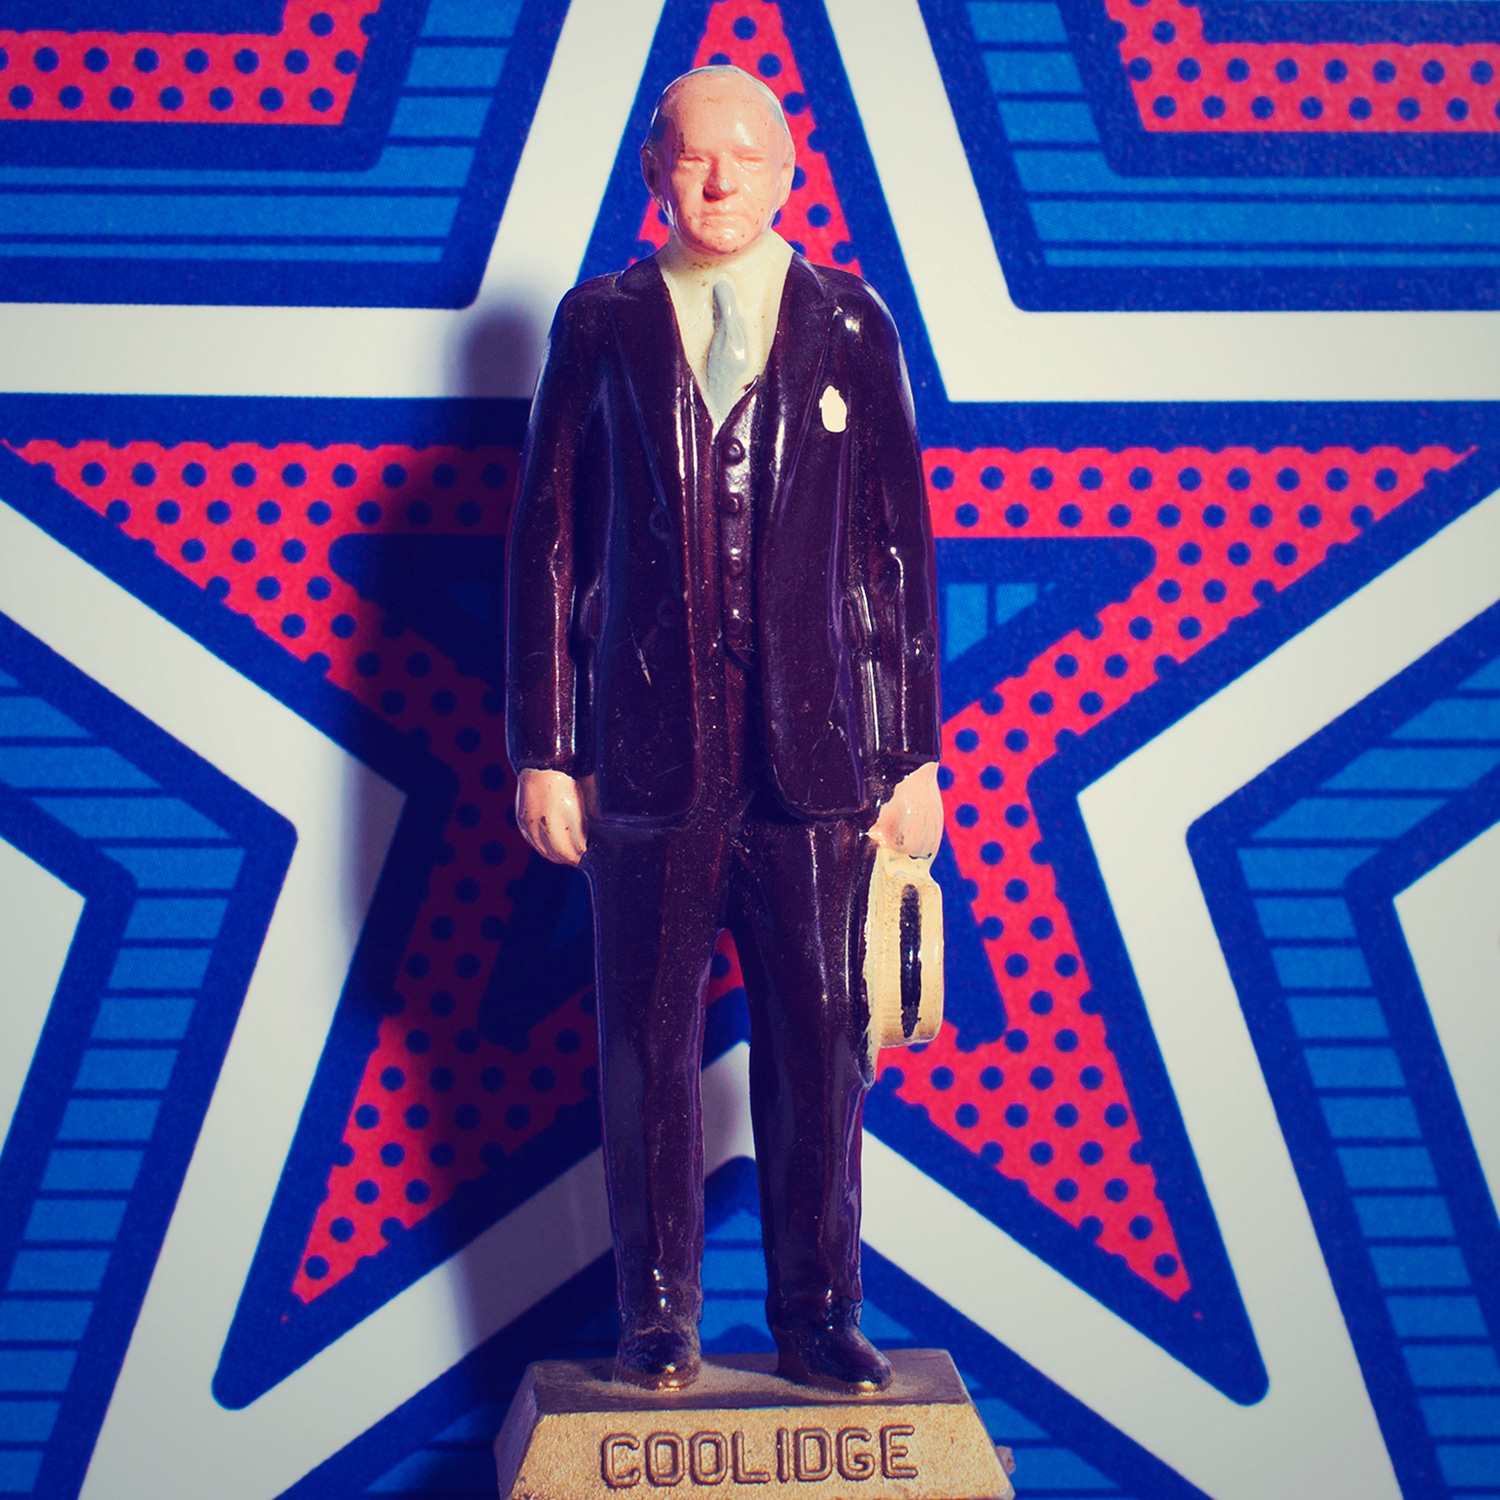 Calvin Coolidge: A tale of two Coolidges